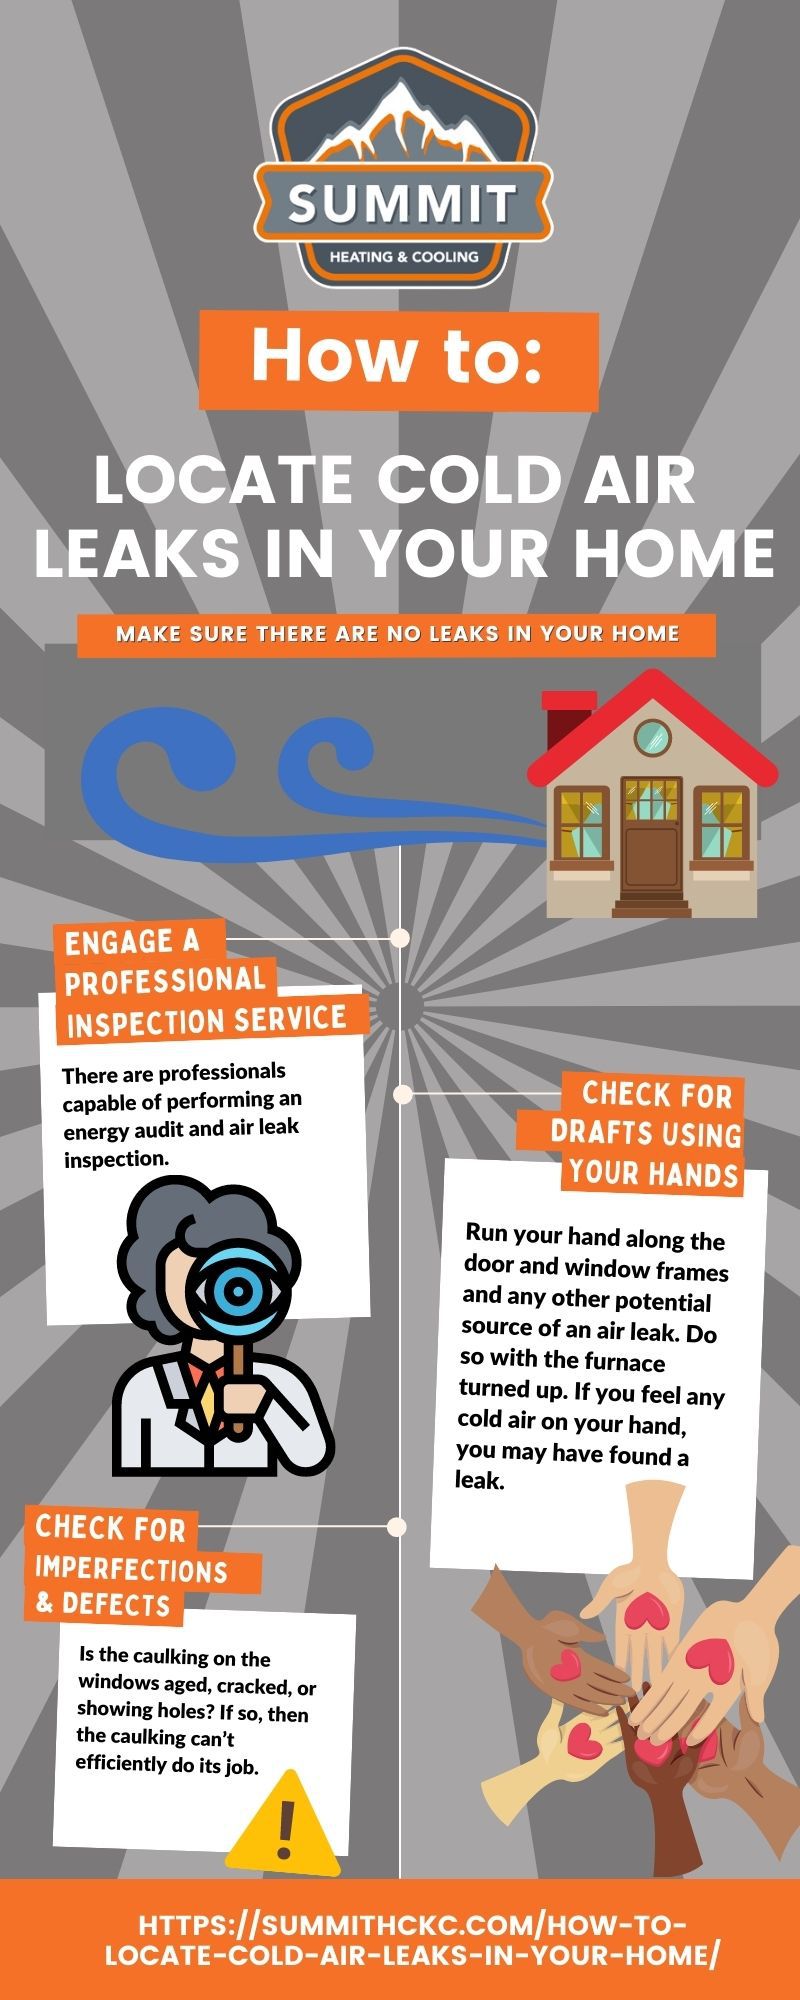 How To Locate Cold Air Leaks in Your Home